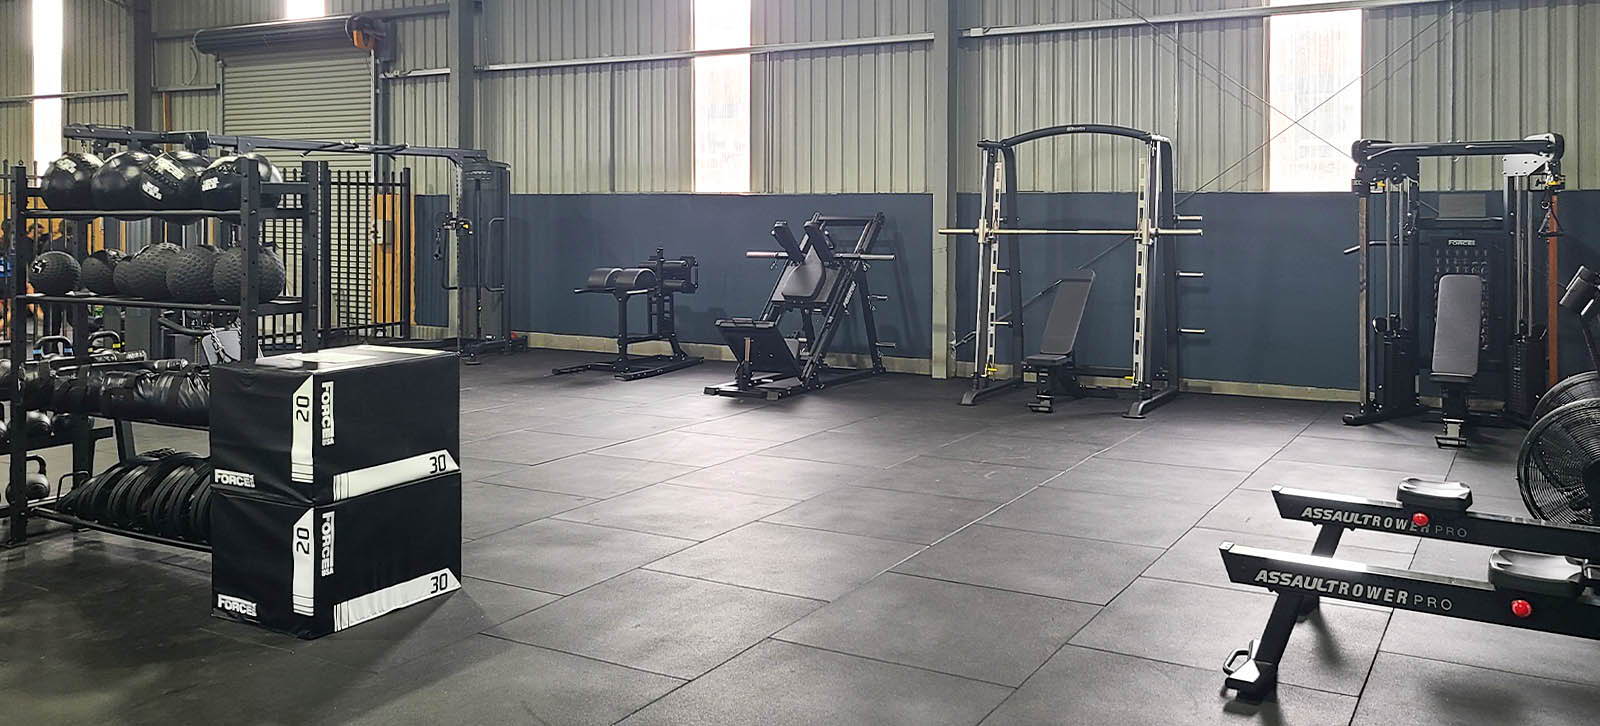 High School Gym Fit Out at Monaro School showcasing a variety of strength training machines and power racks for student athletes.